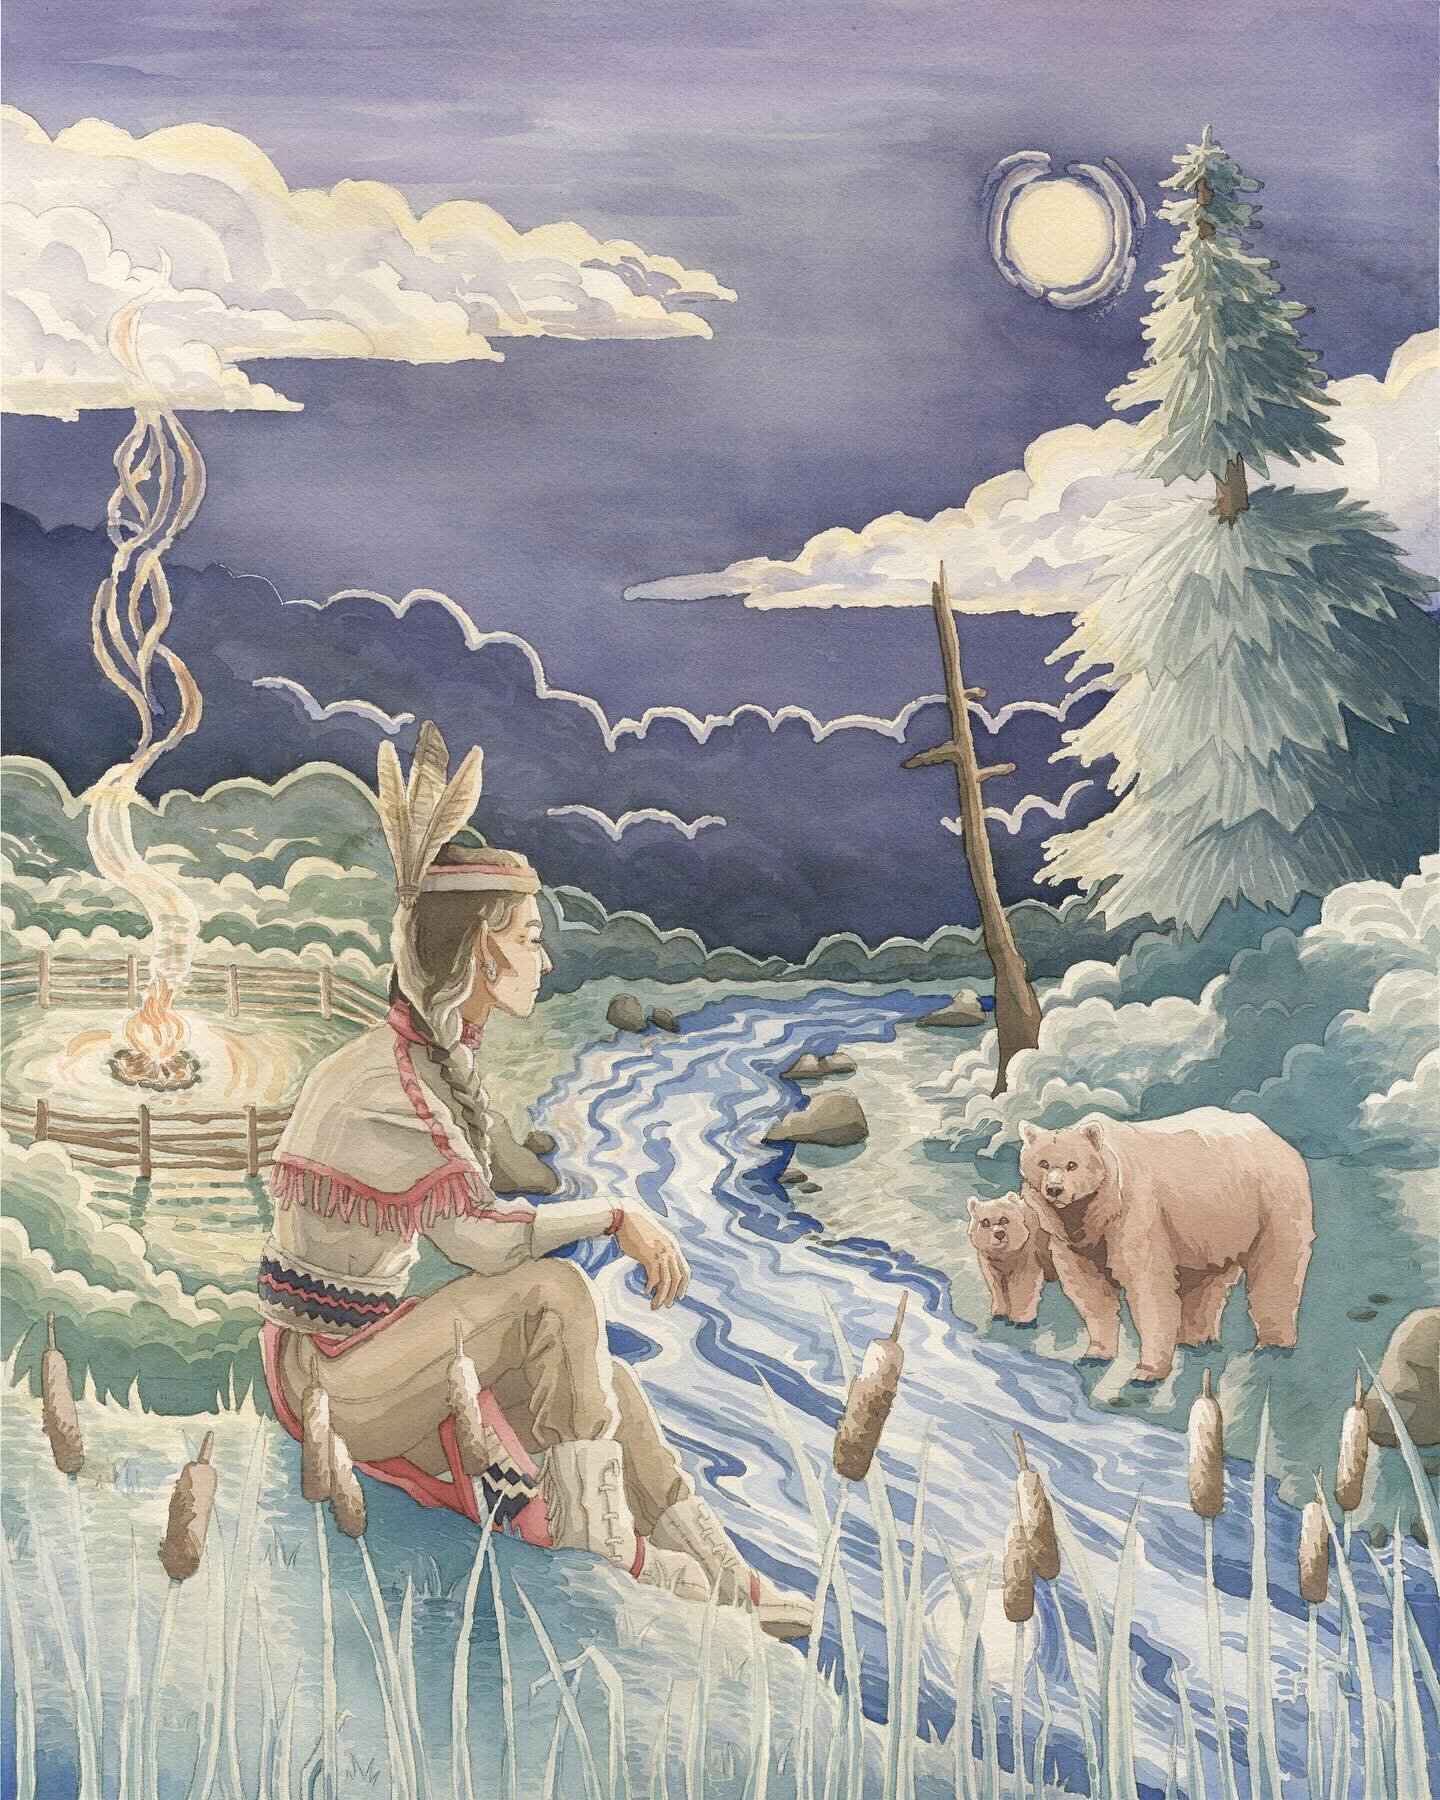 Senior Illustration Thesis Piece: Bear Mother! 🐻🌲🌕
1813: Western Expansion (Watercolor painting 4 of 4!)
16x20 inches
In modern day Colorado, a man of the Ute Tribe has a moment of reflection on the times. Every year, the Ute Tribe holds a yearly 